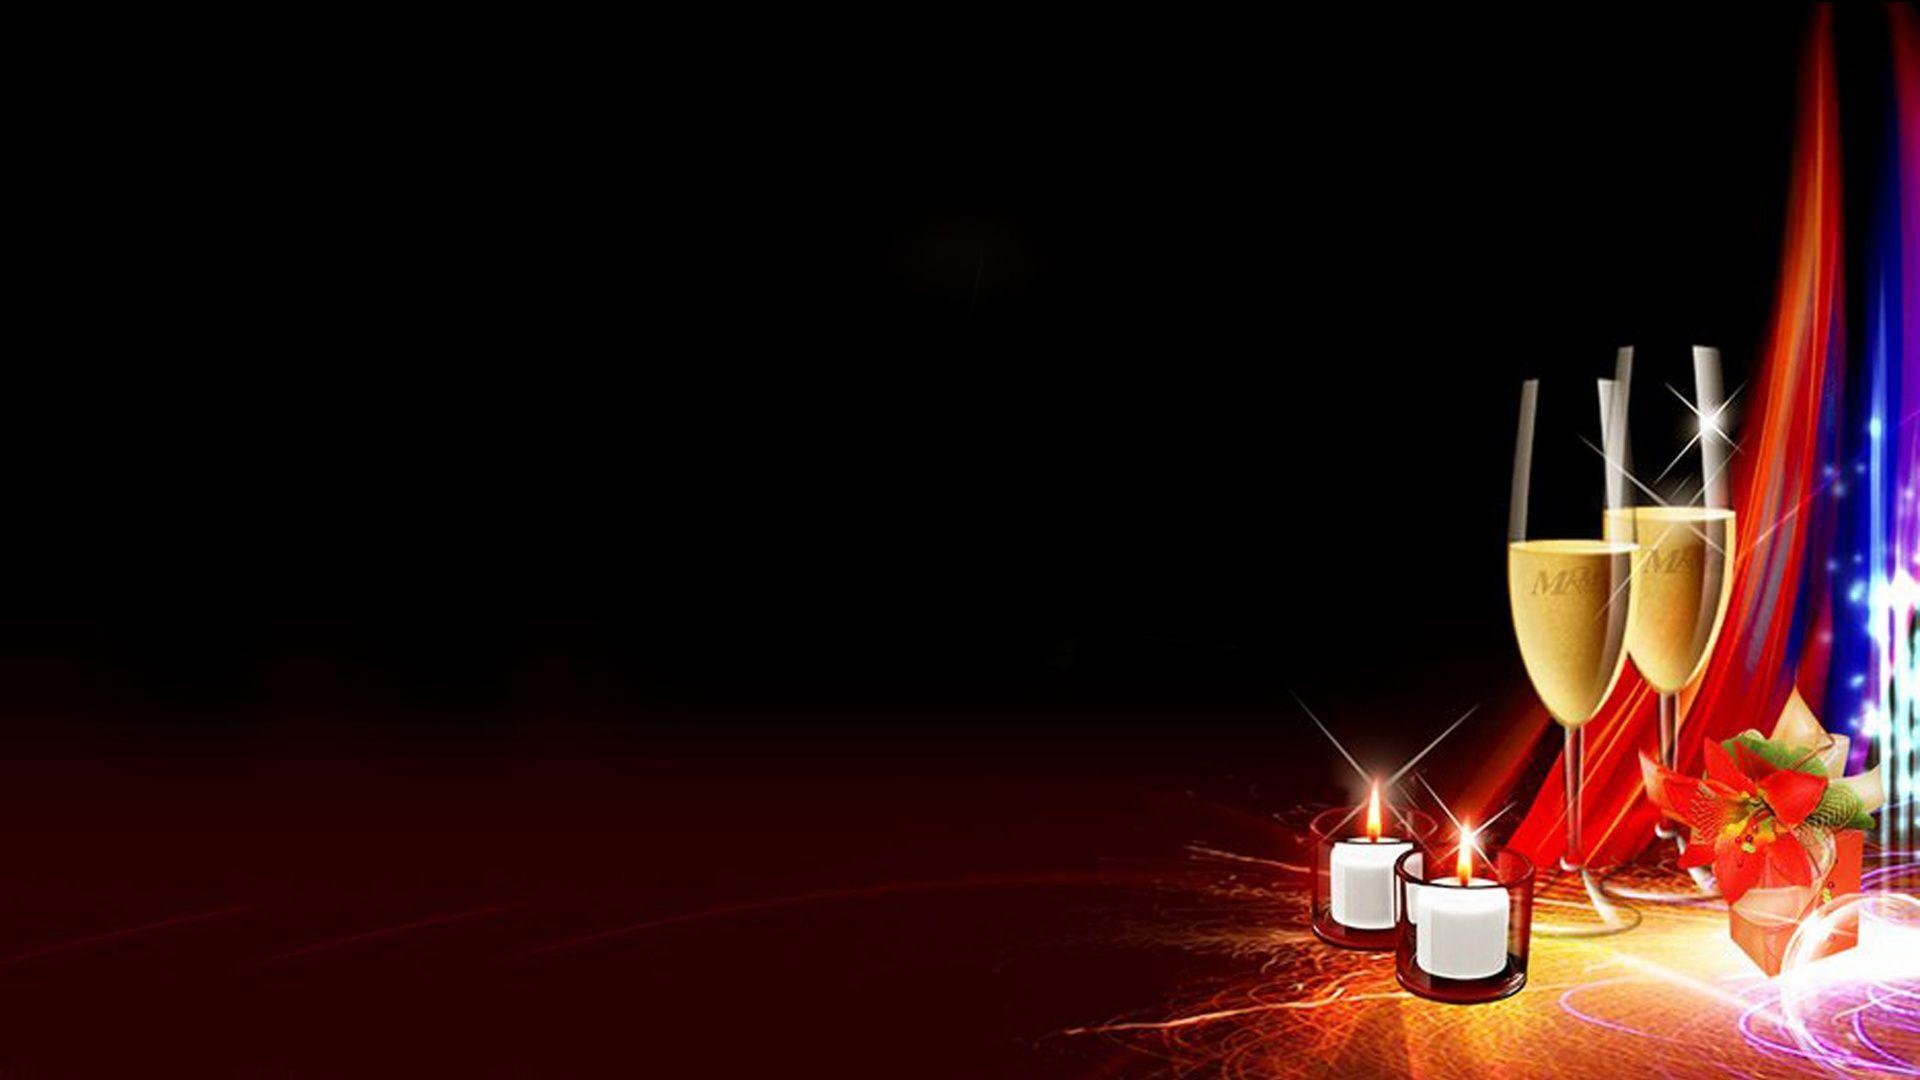 Party Wallpaper, Party Image for Desktop Handpicked Party